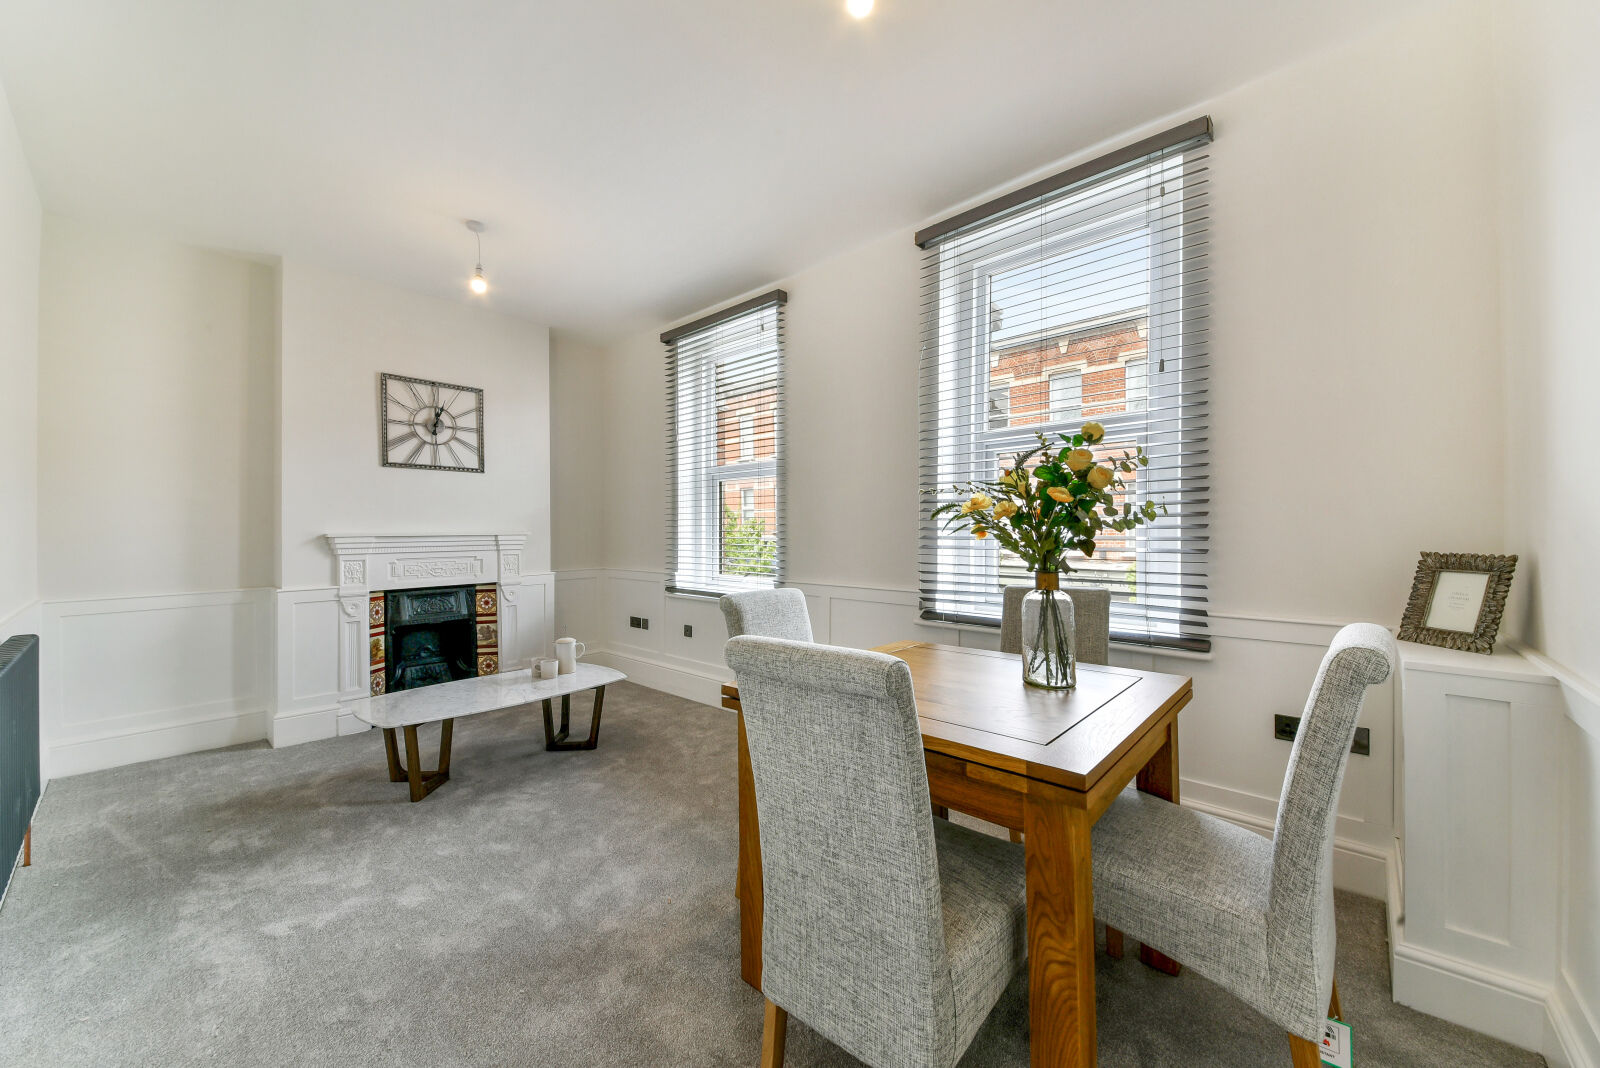 3 bedroom  flat to rent, Available now Leopold Road, London, SW19, main image